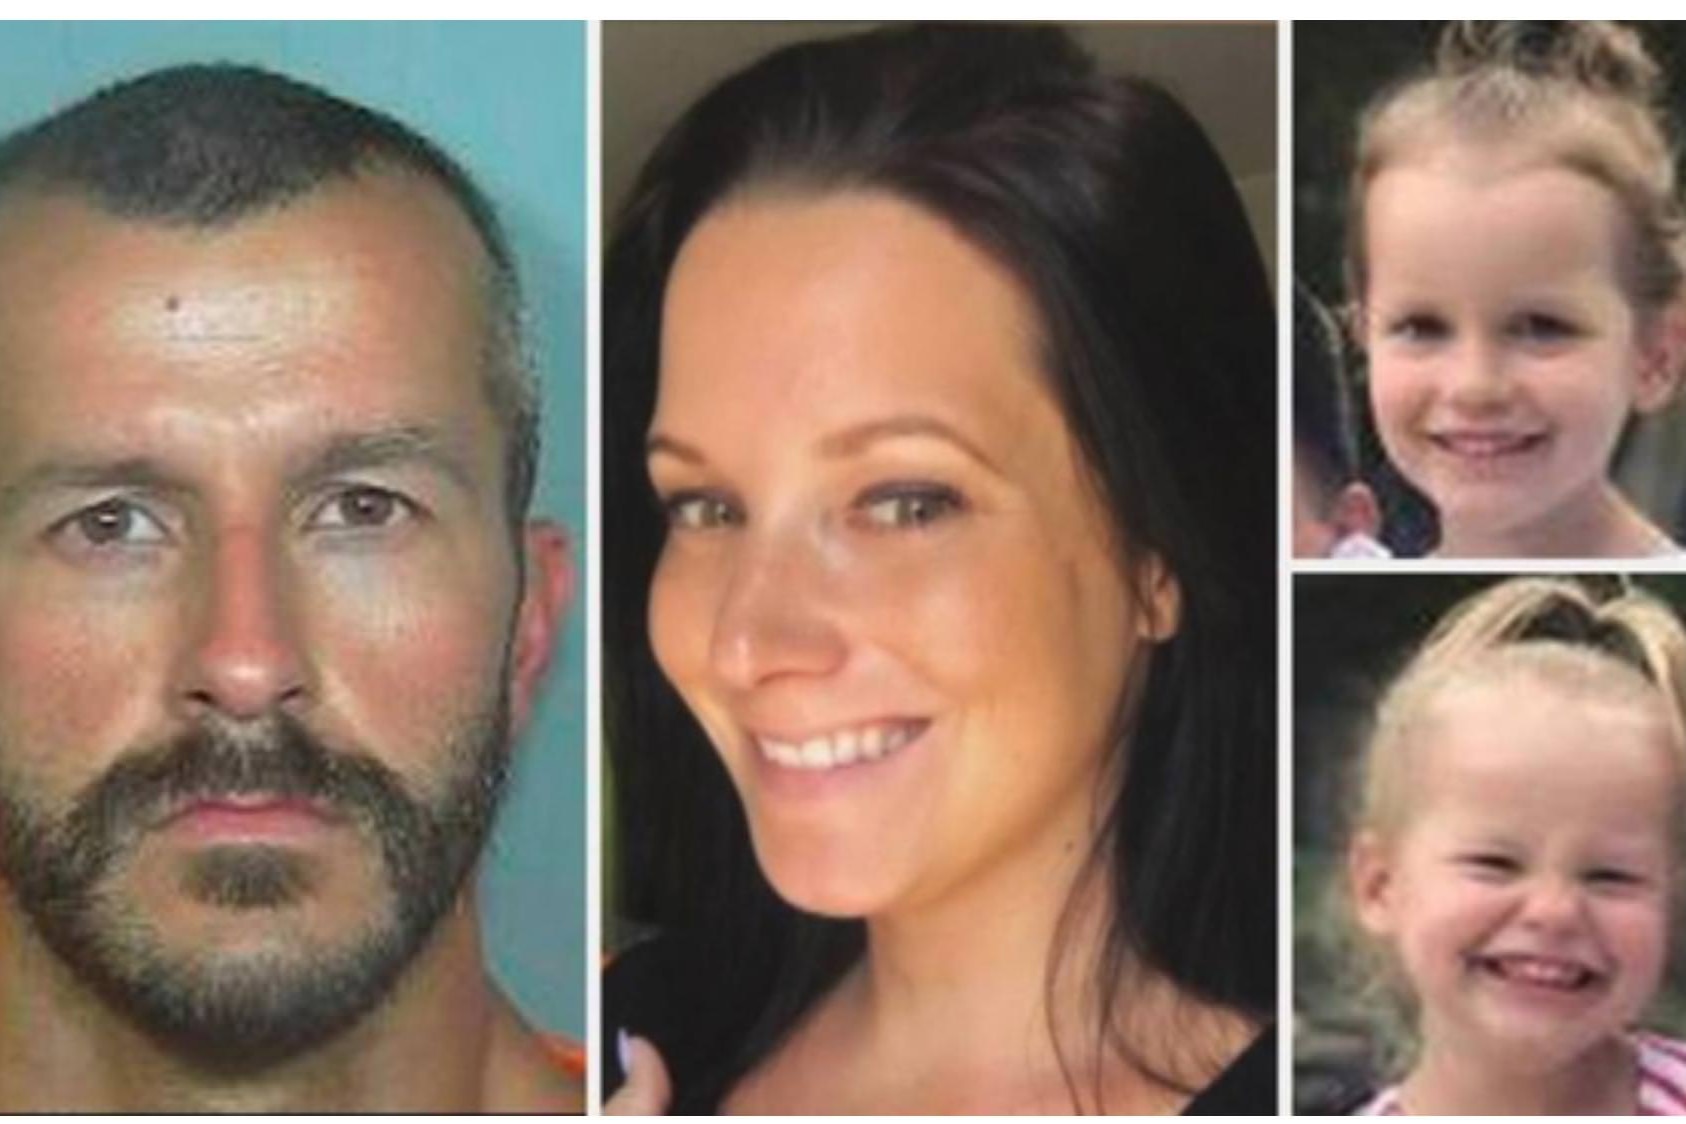 Chris Watts Arraigned As Shanann Watts’ Dad Frank Rzucek Weeps In Court | Crime Time1686 x 1124